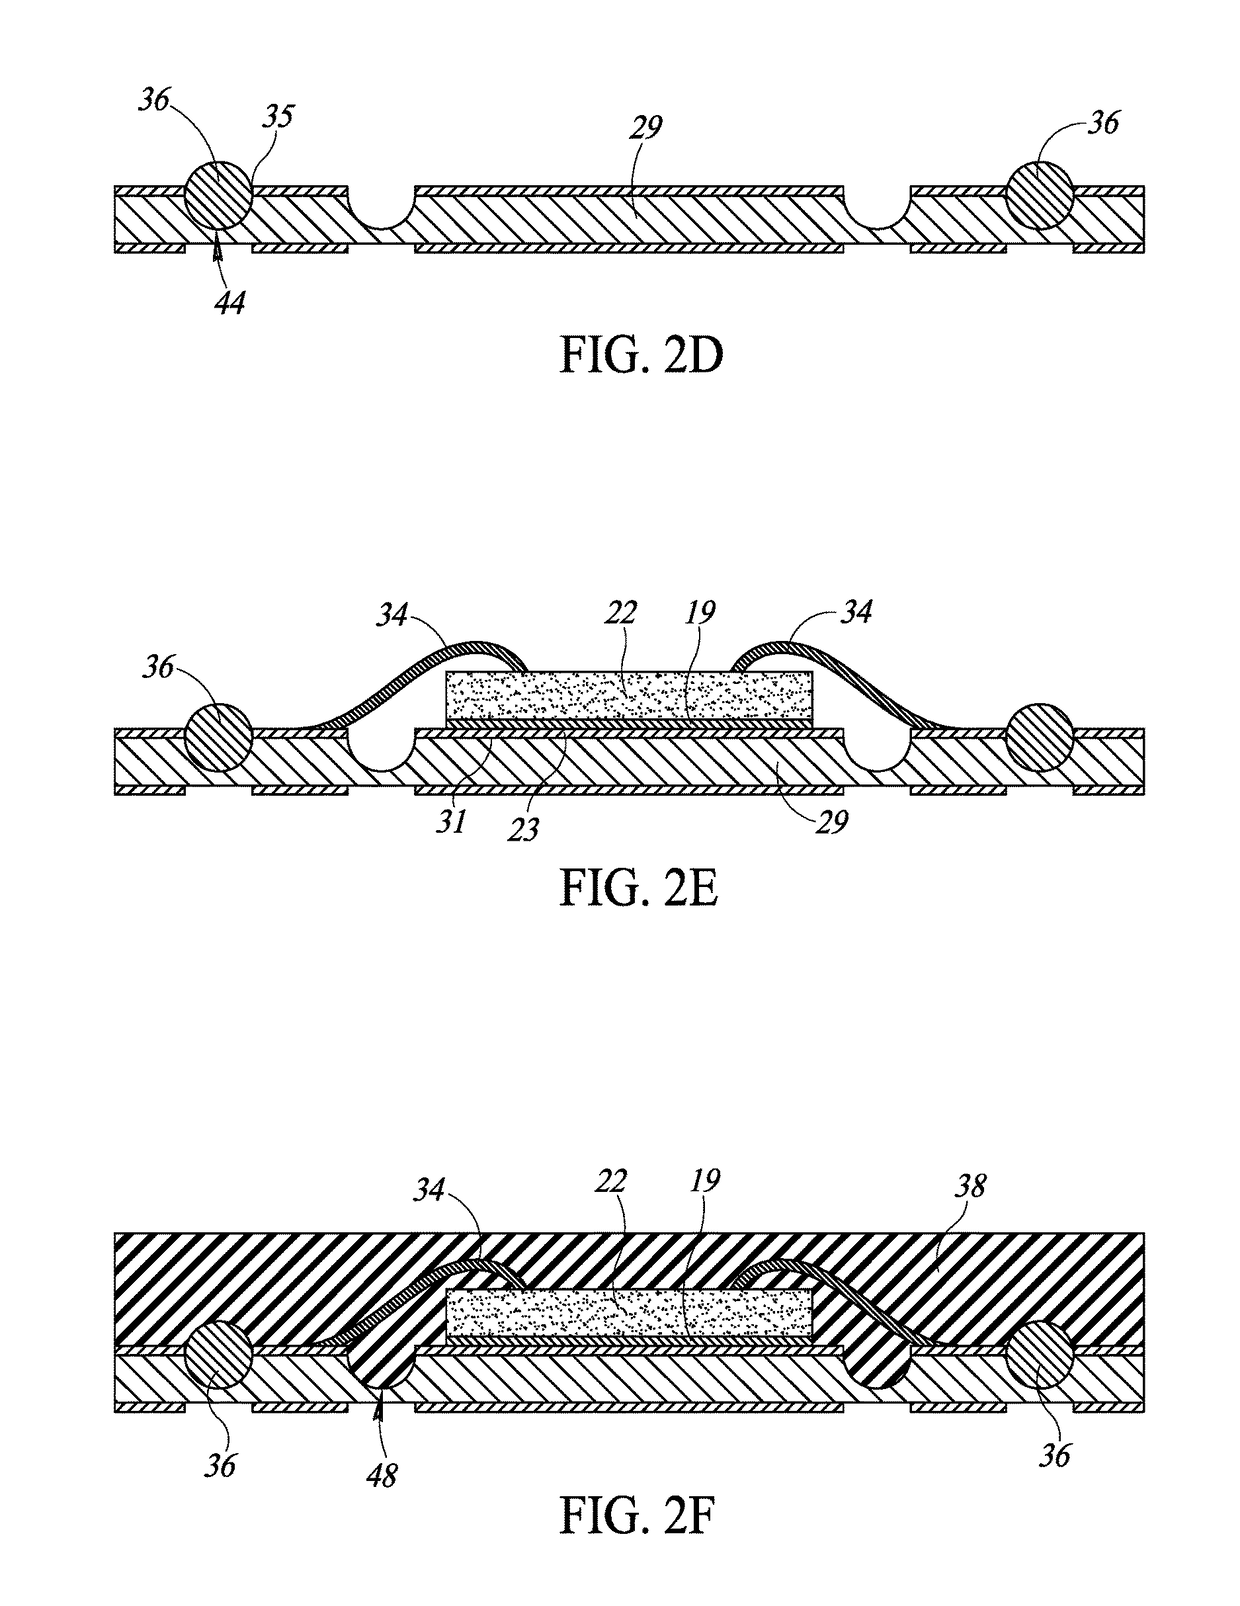 Leadframe package with side solder ball contact and method of manufacturing